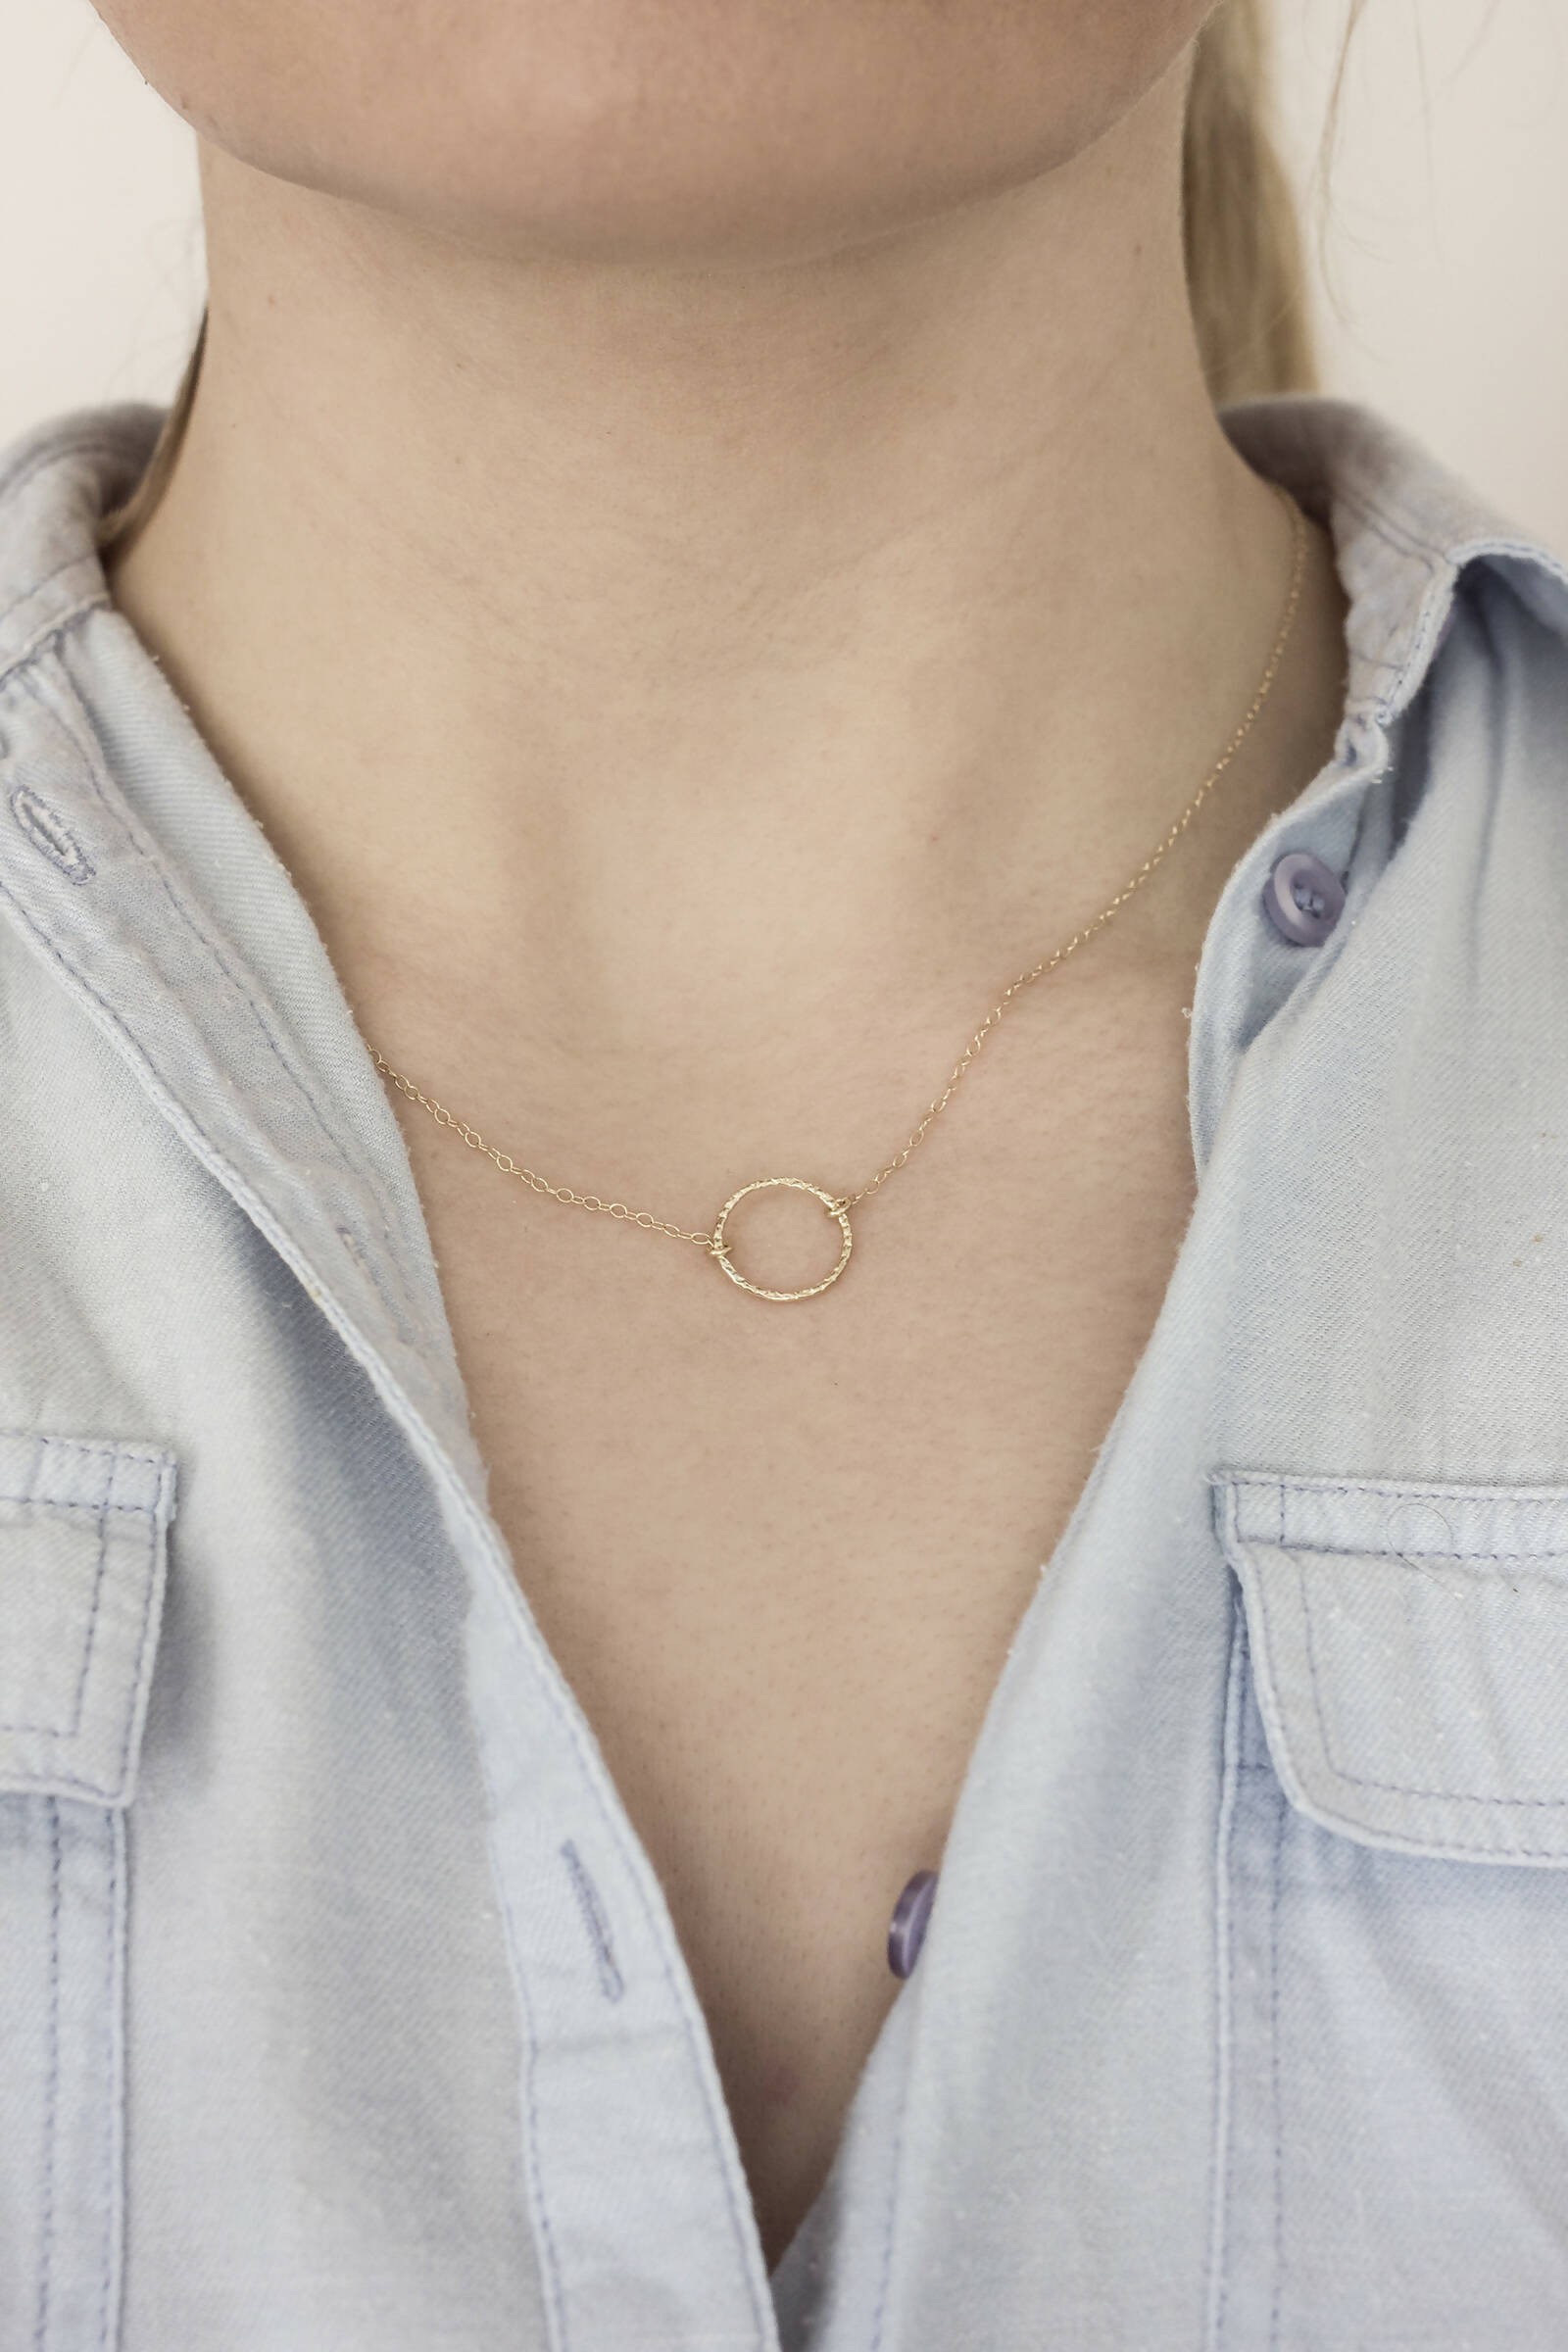 Textured Circle Necklace - 14k gold fill